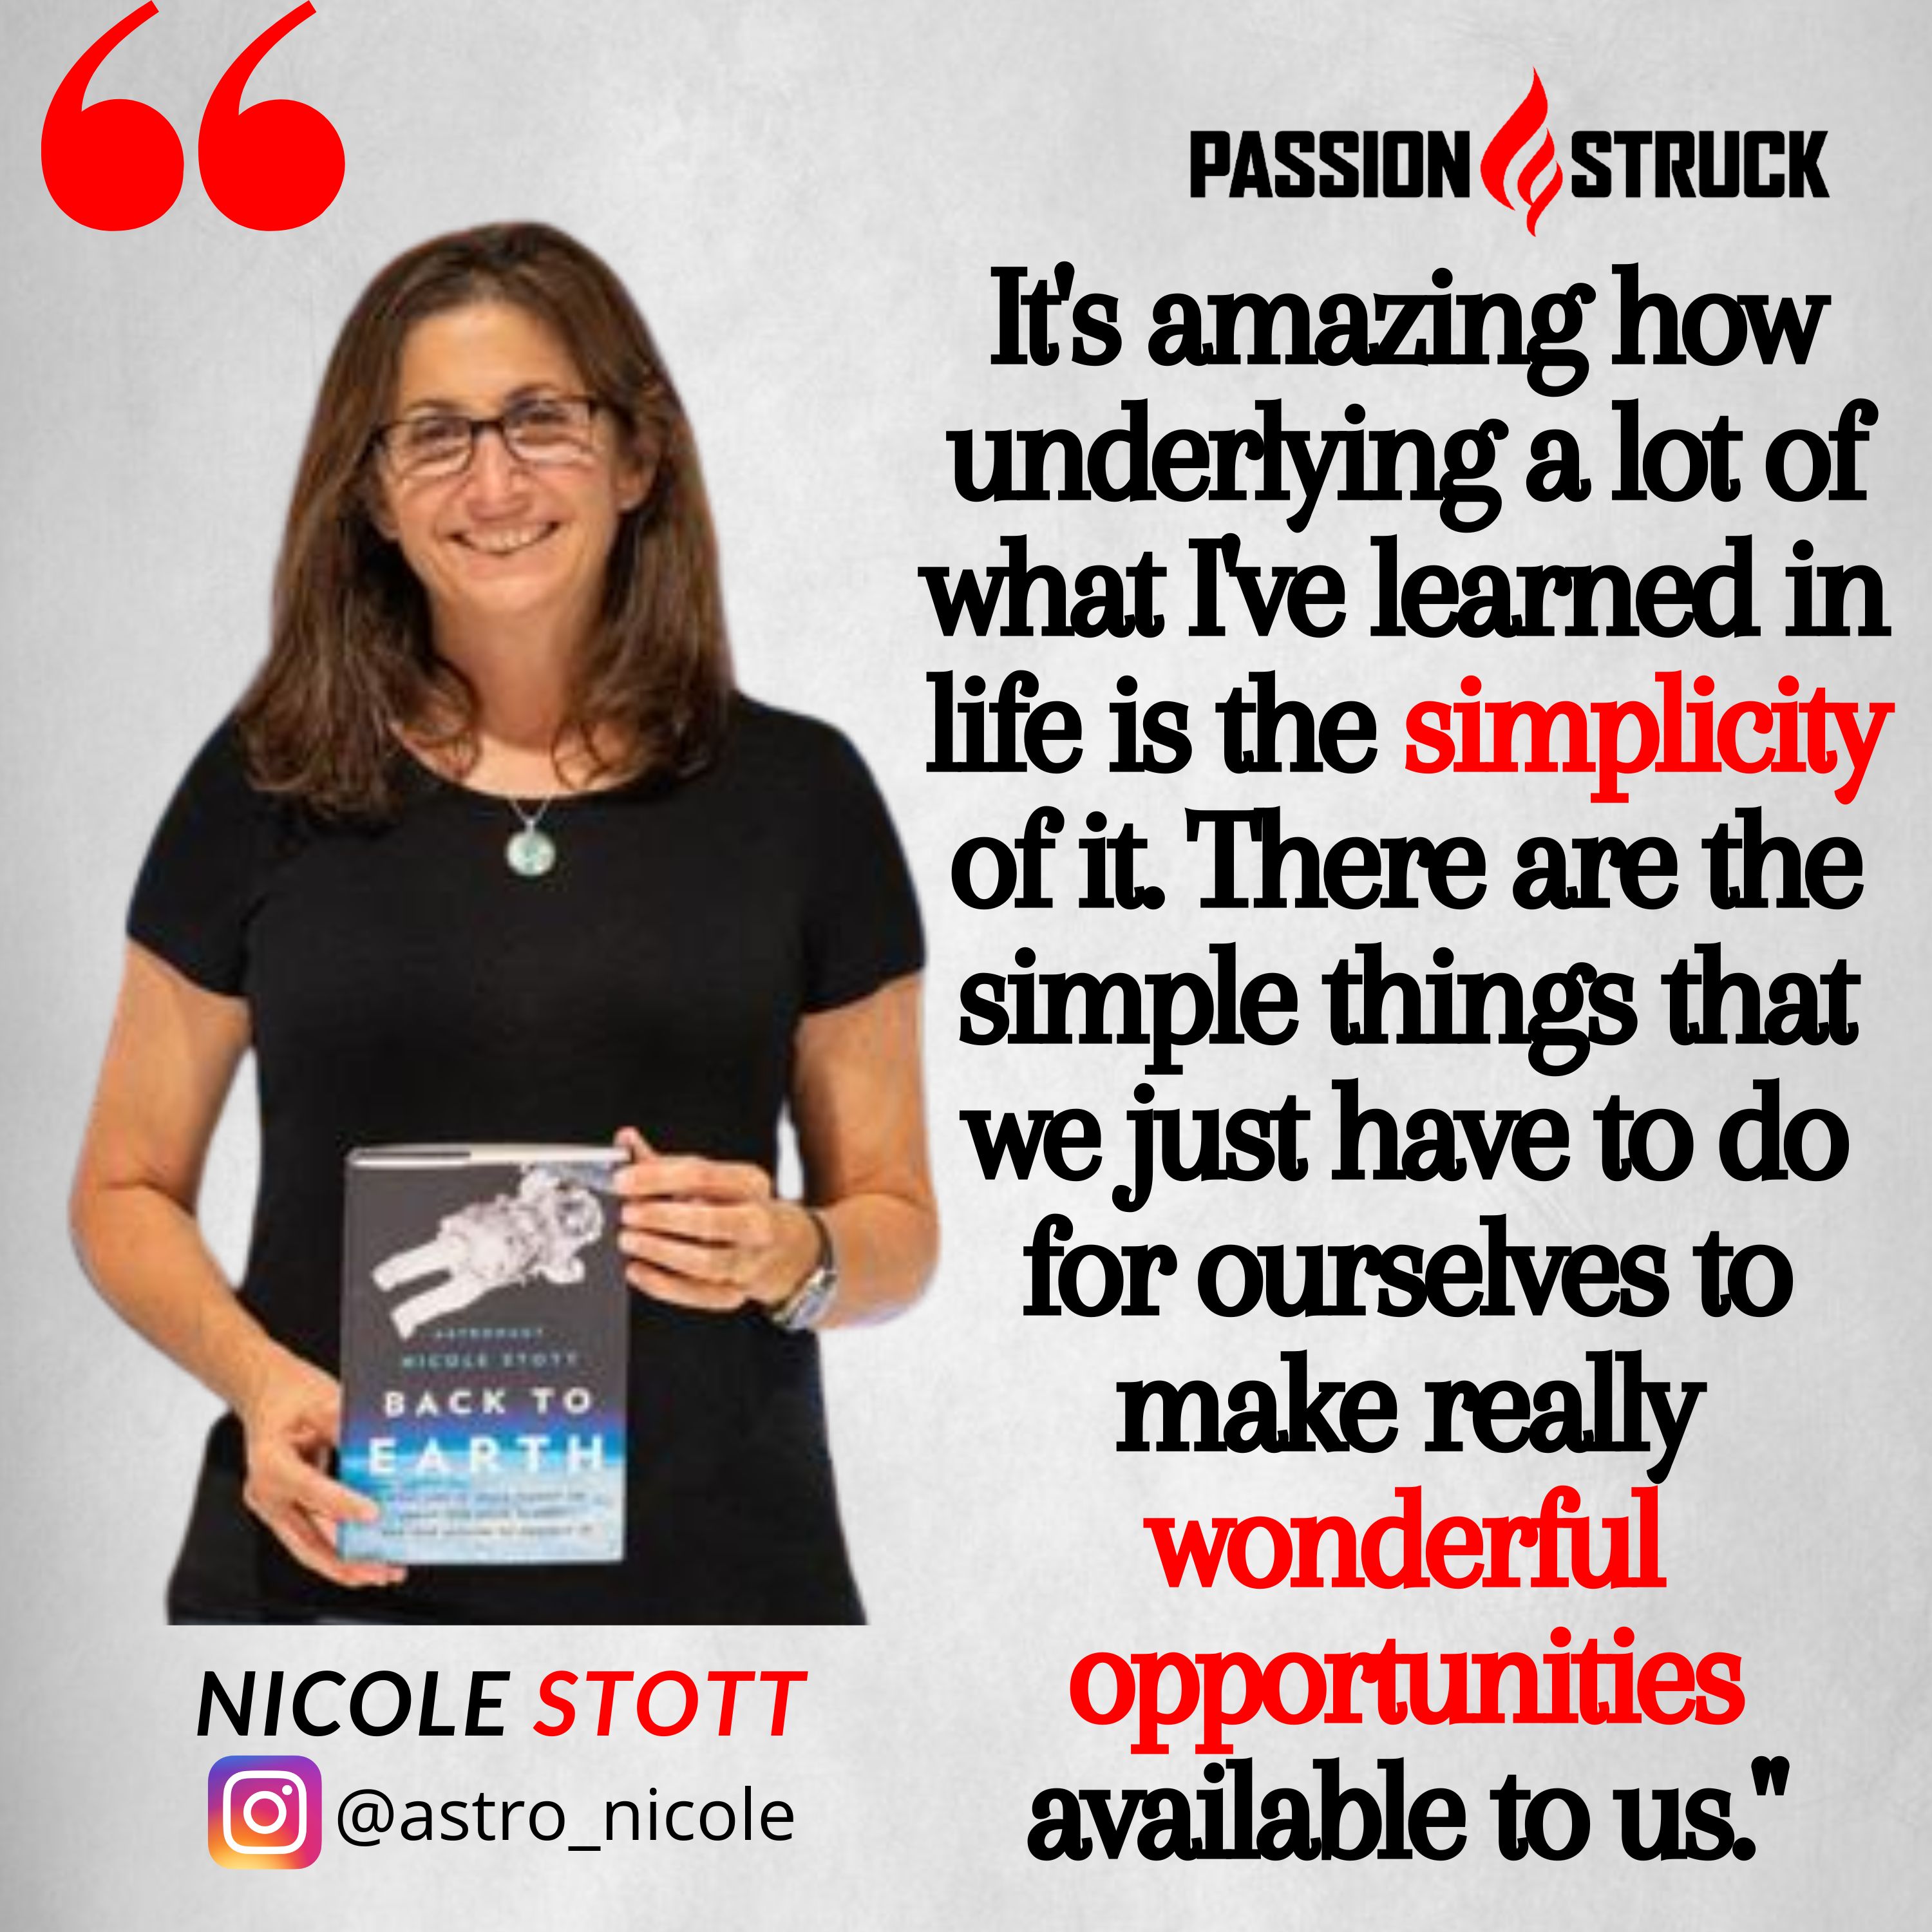 Nicole Stott quote on the simplicity of life from the passion struck podcast